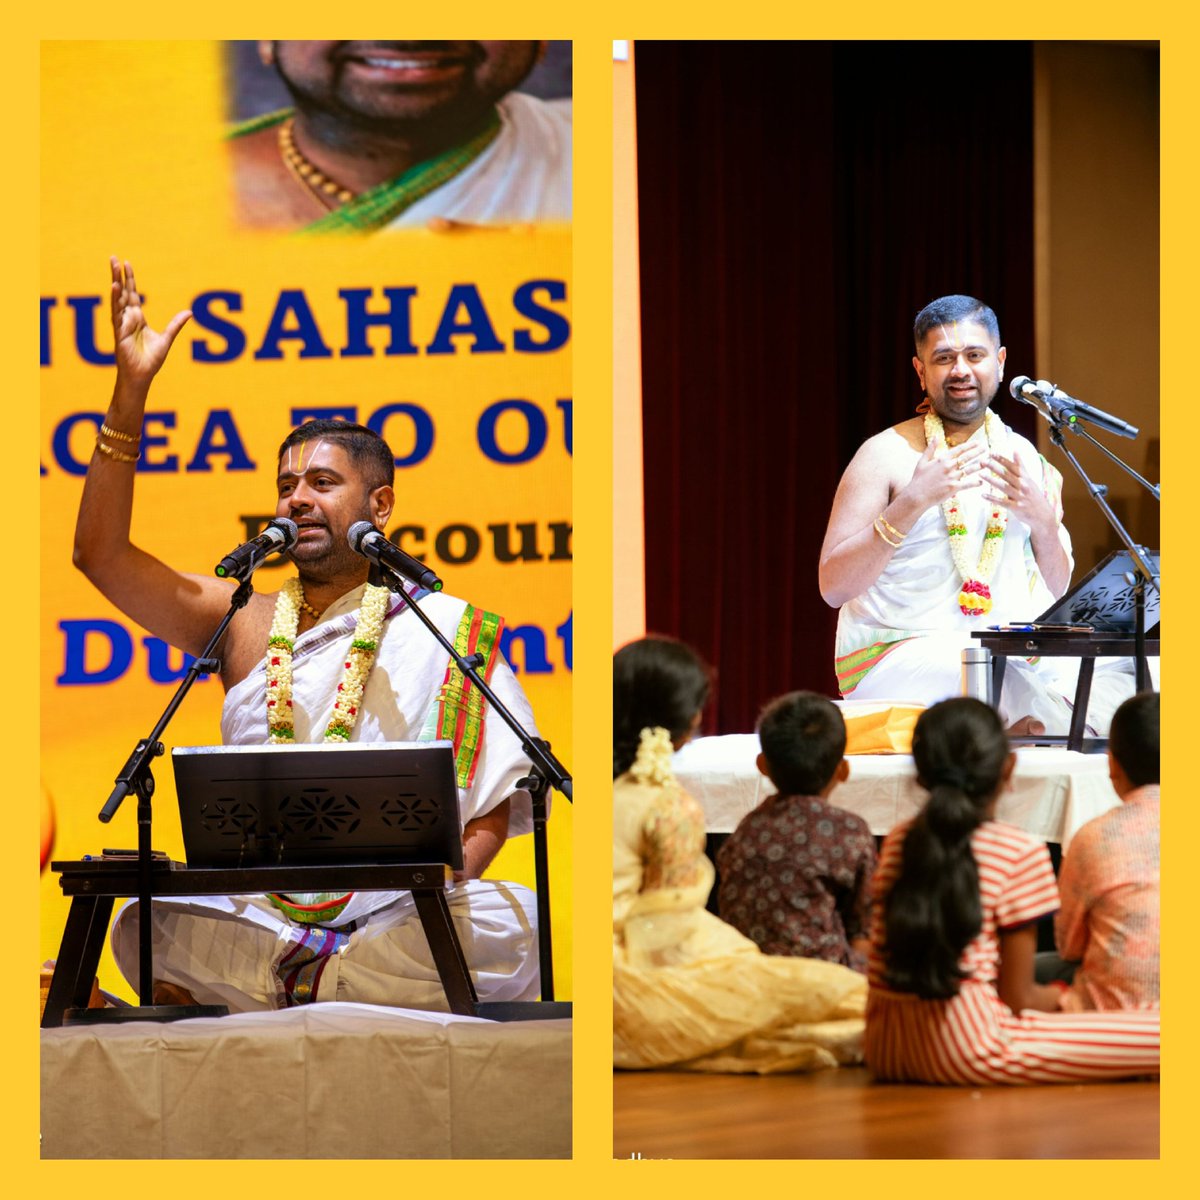 It was the 100th year celebration of #Singapore Dakshina Bharata Brahmana Samooham. For a capacity of 550 seats, there was prior registration of 800+ participants. #Astikas across different communities attended the English Talk on Sri #vishnusahasranamam. The overflowing devotees…